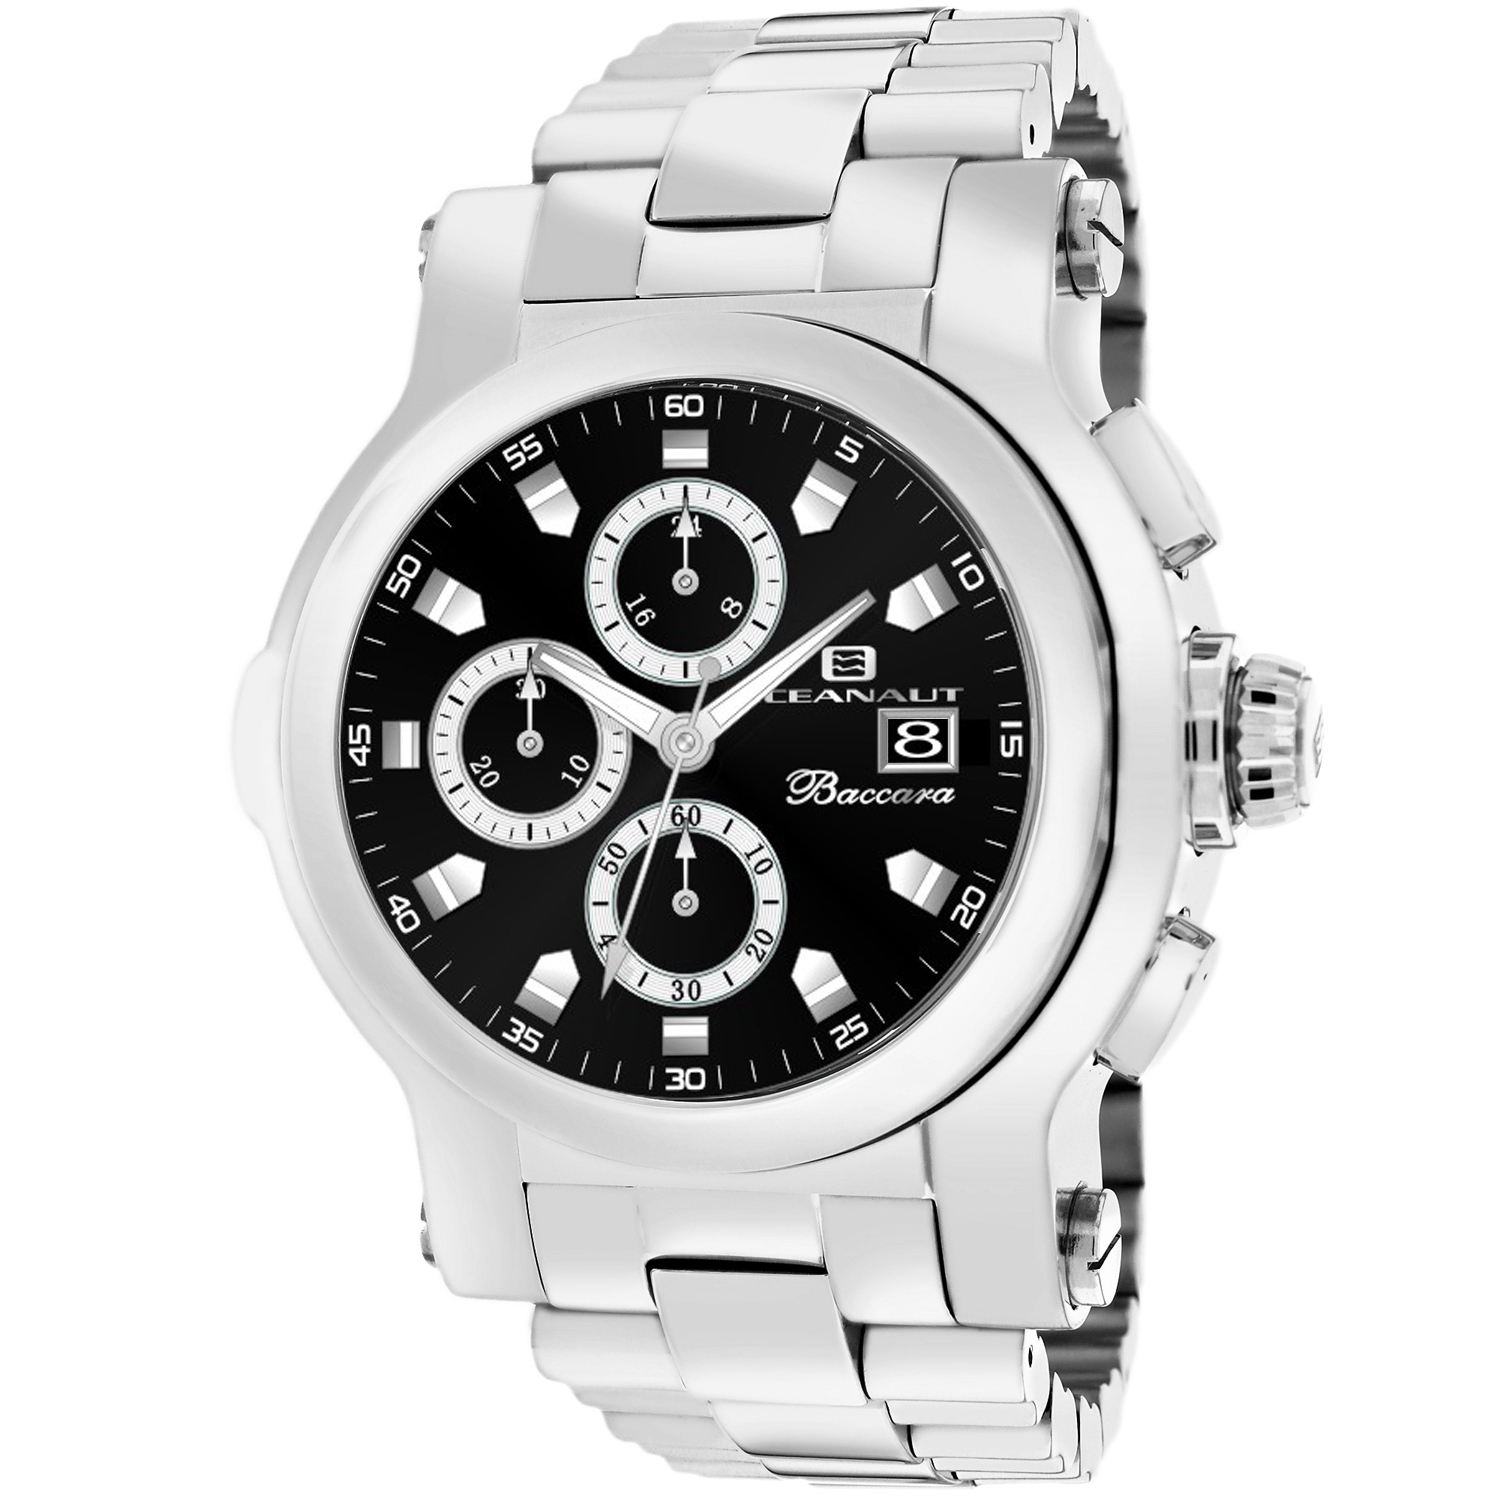 Oceanaut Baccara Stainless Steel Chronograph Mens Watch OC0821